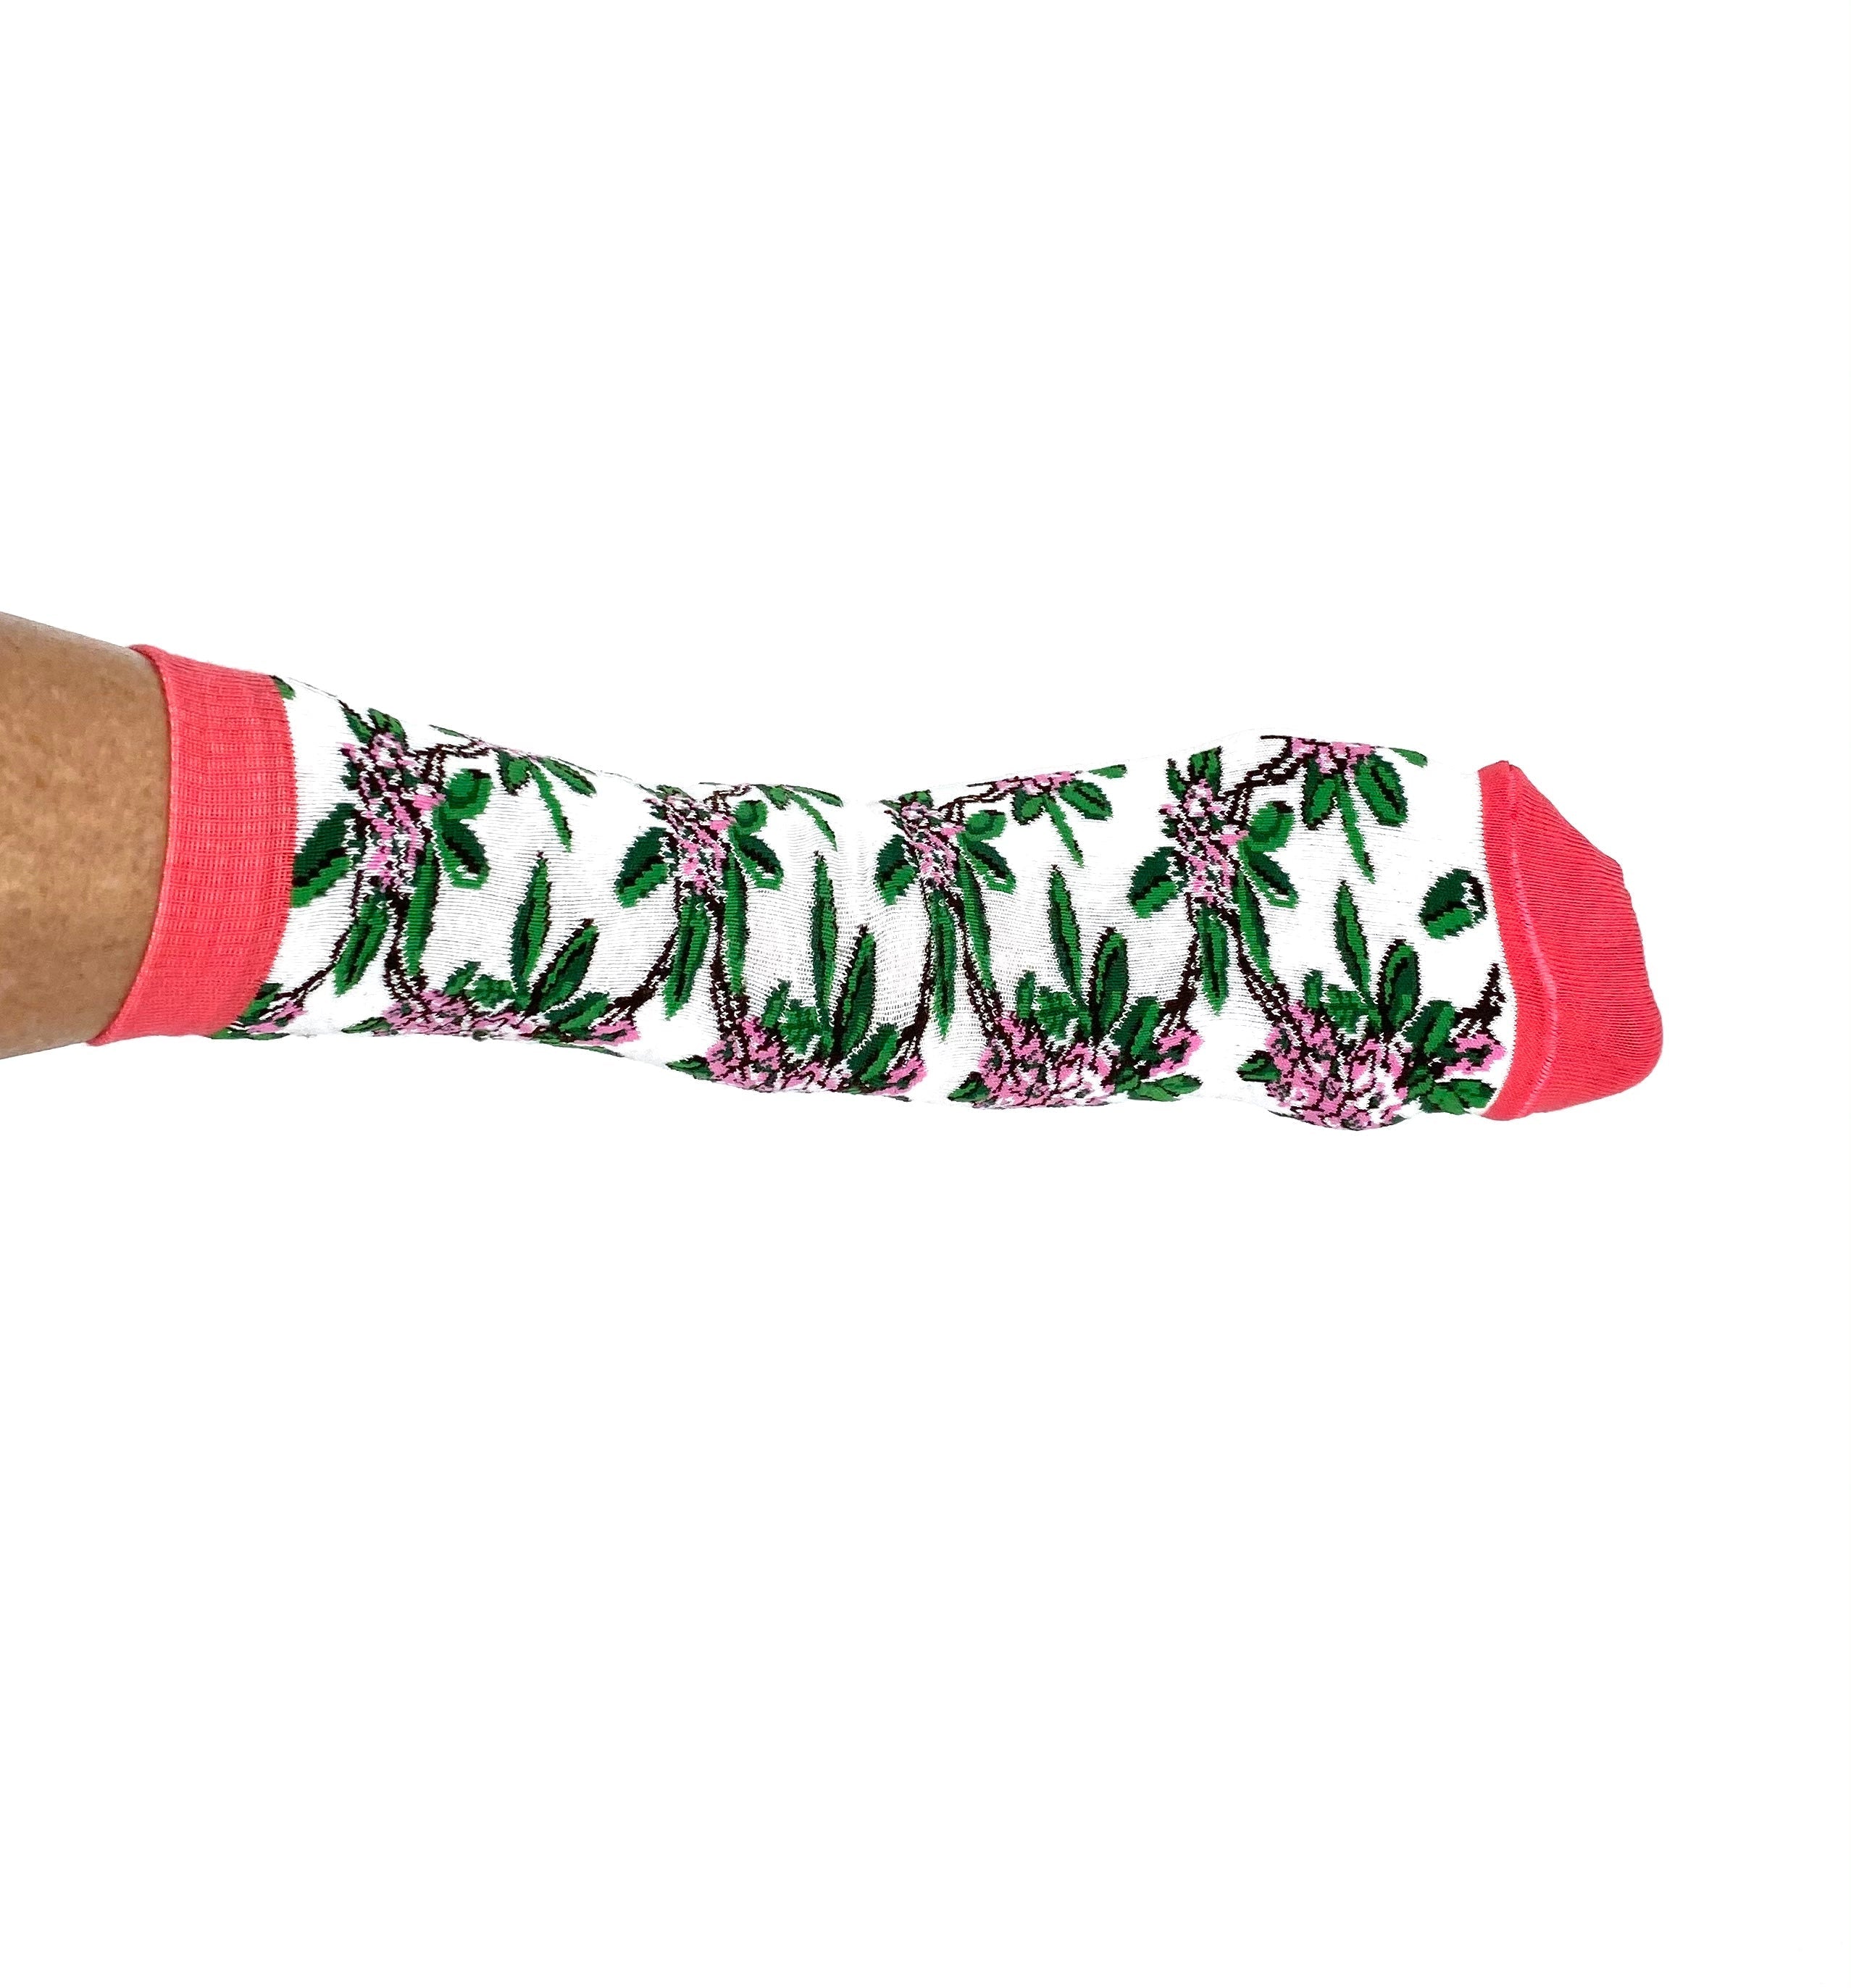 Rhododendron Socks -  White - Purchase Two Pairs and get Free Shipping